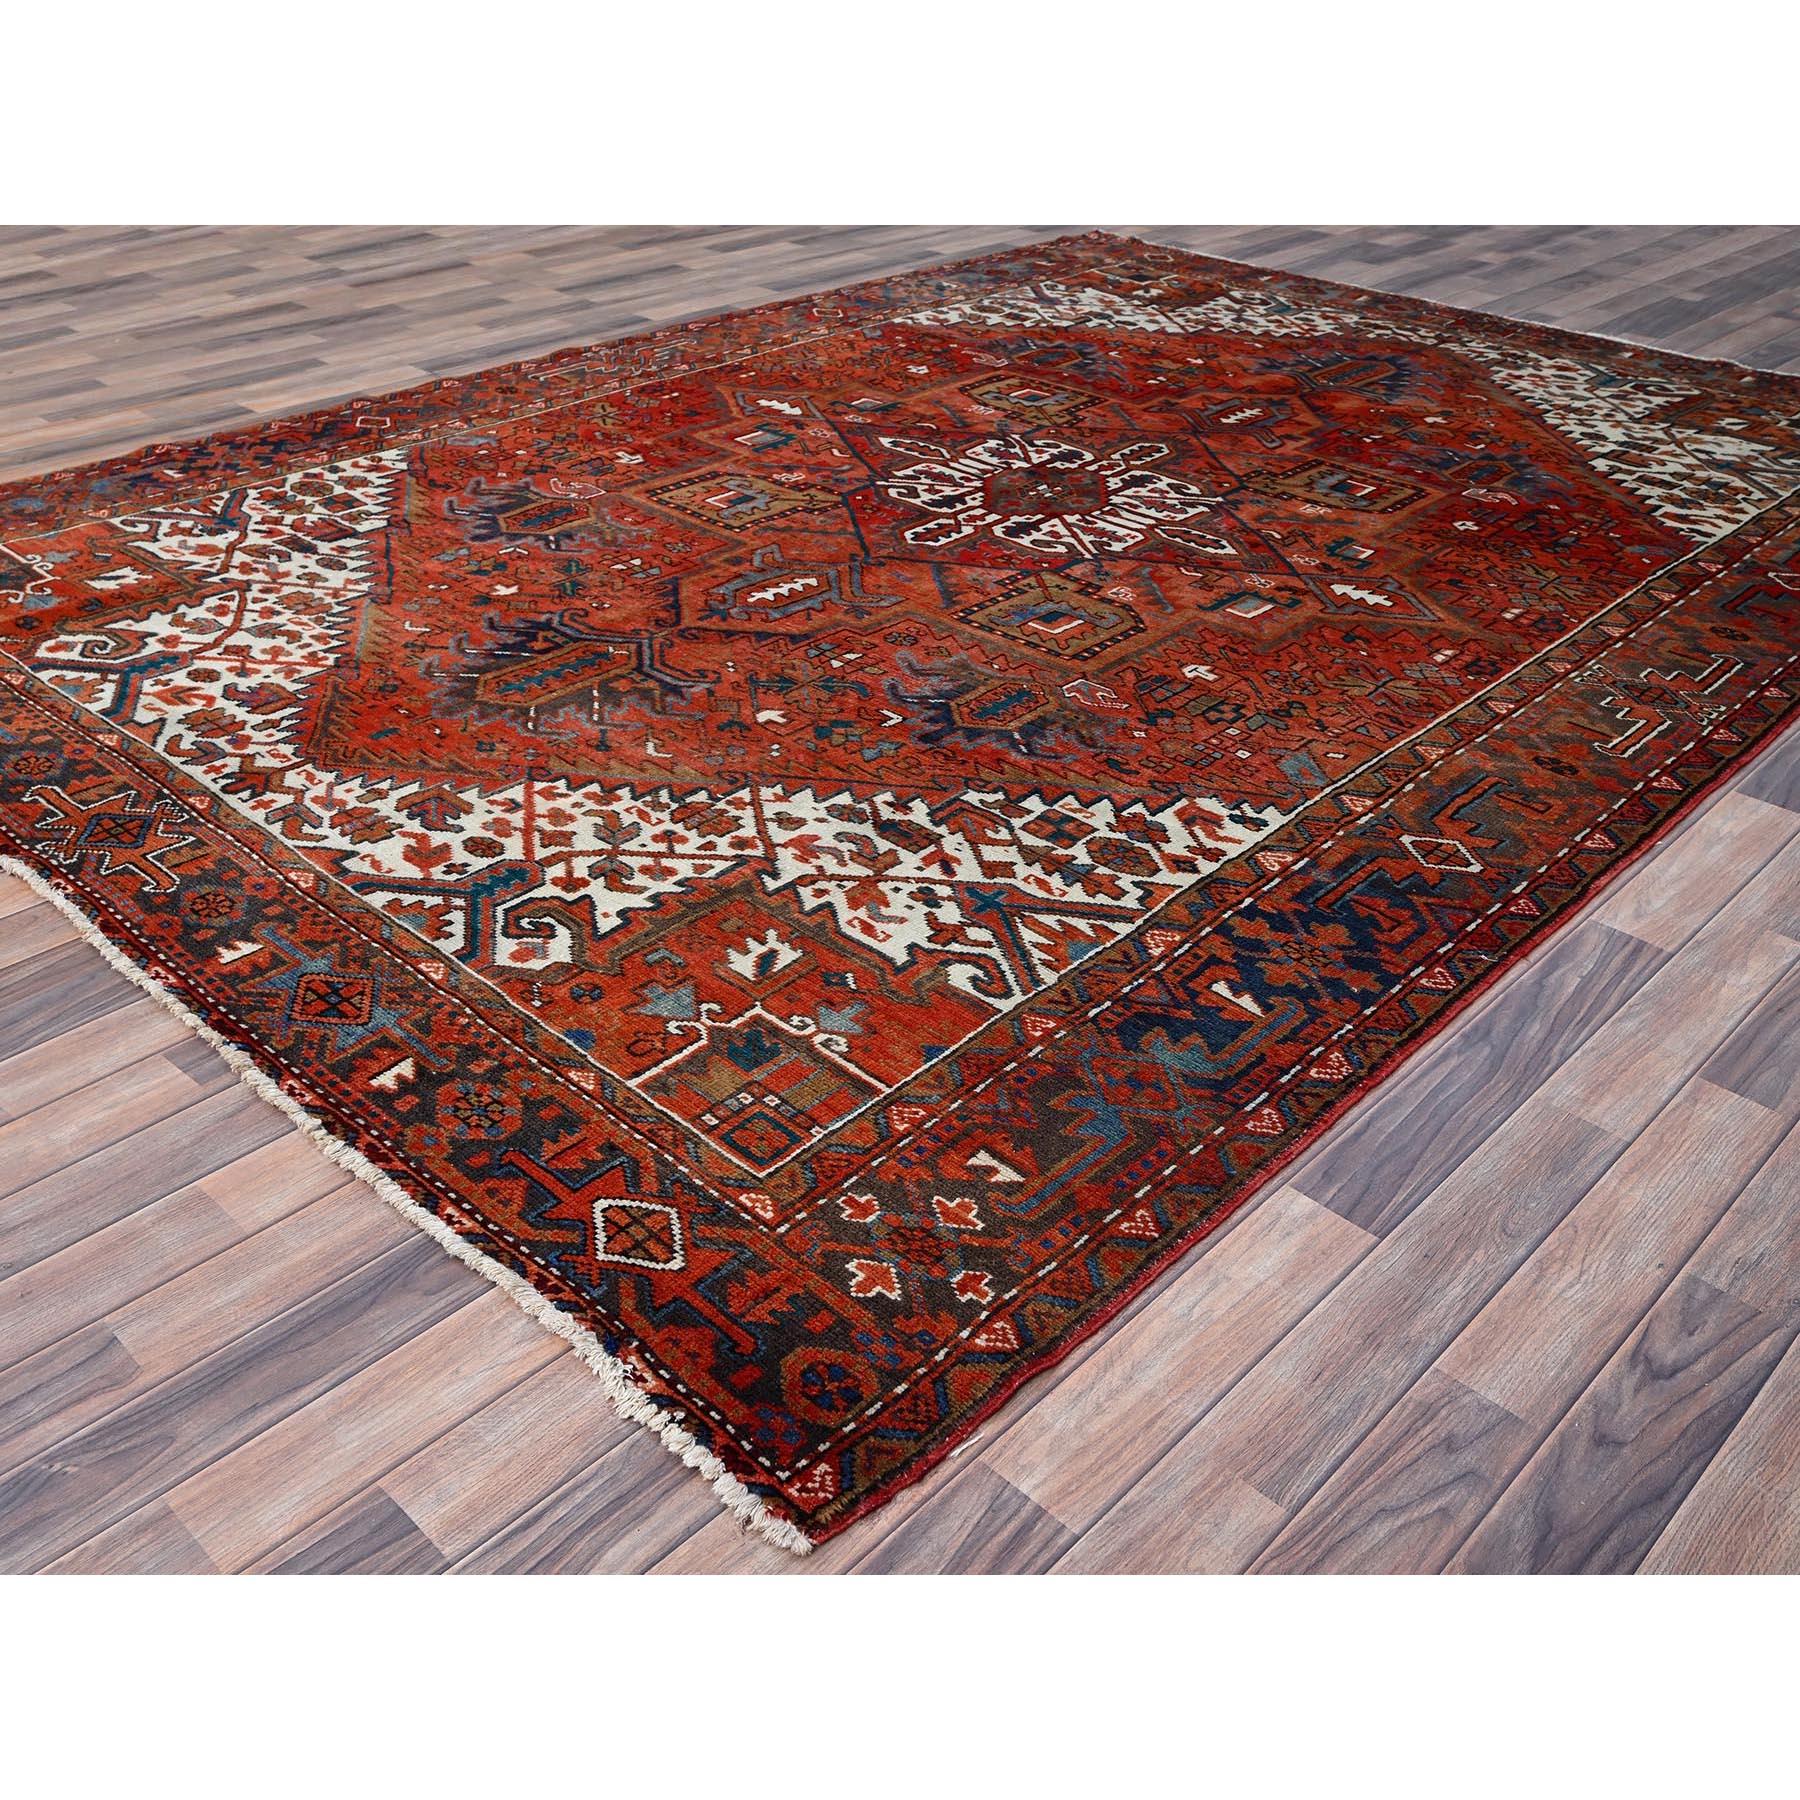 Medieval Red Vintage Persian Heriz Rustic Look Evenly Worn Wool Hand Knotted Clean Rug For Sale